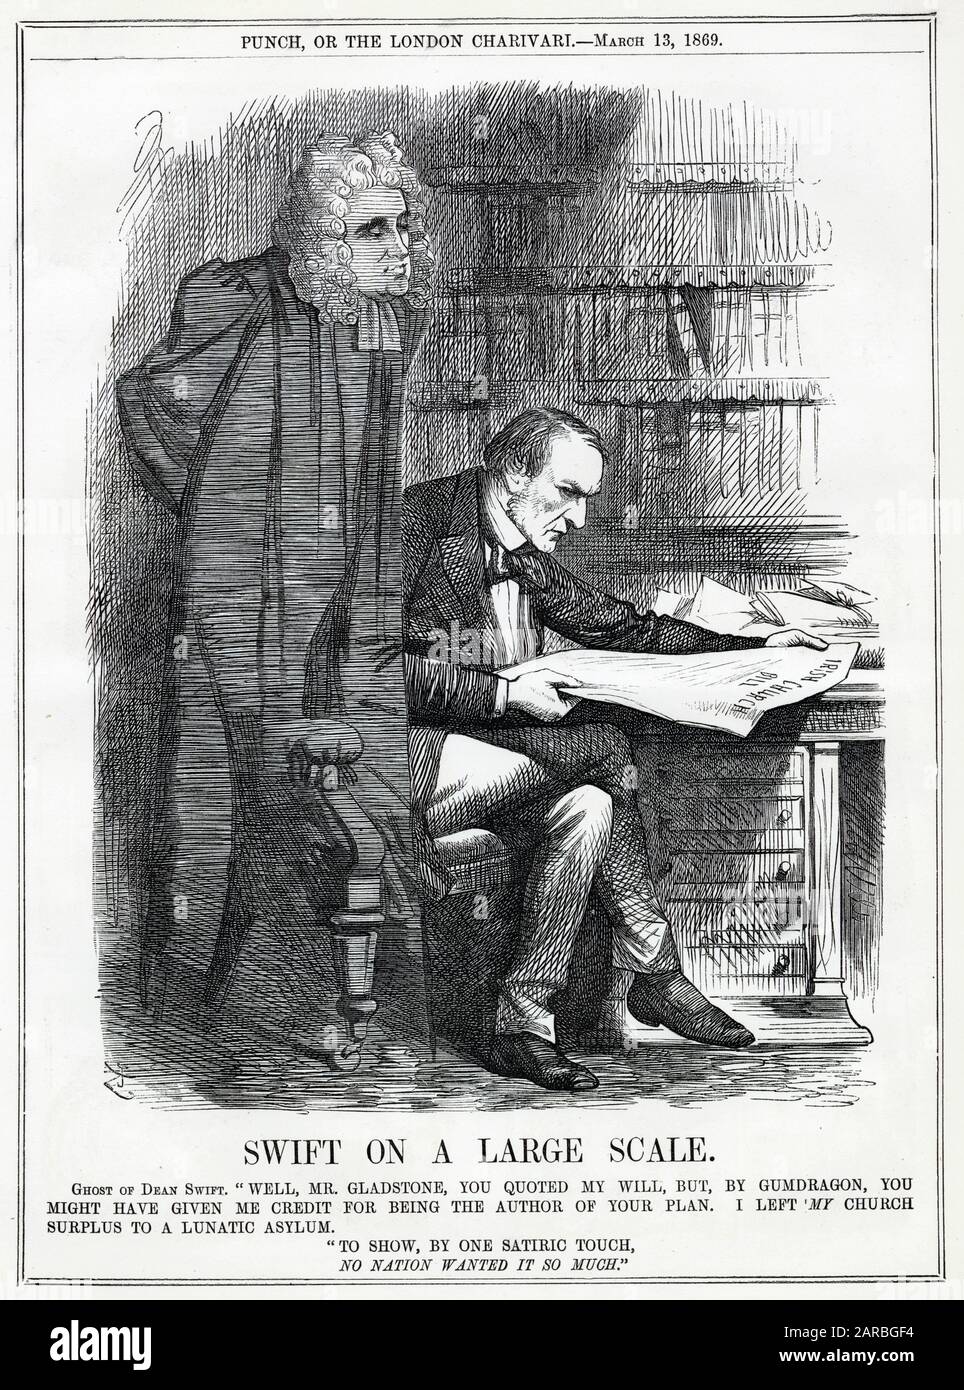 Cartoon, Swift on a Large Scale -- a comment on Gladstone's assigning the surplus from Irish Church endowments (resulting from the disestablishment of the Irish Church) for humanitarian purposes. The ghost of Dean Swift approves of his action, but thinks he should have credited him with the original idea, as he also left money in his will for similar purposes.      Date: 1869 Stock Photo